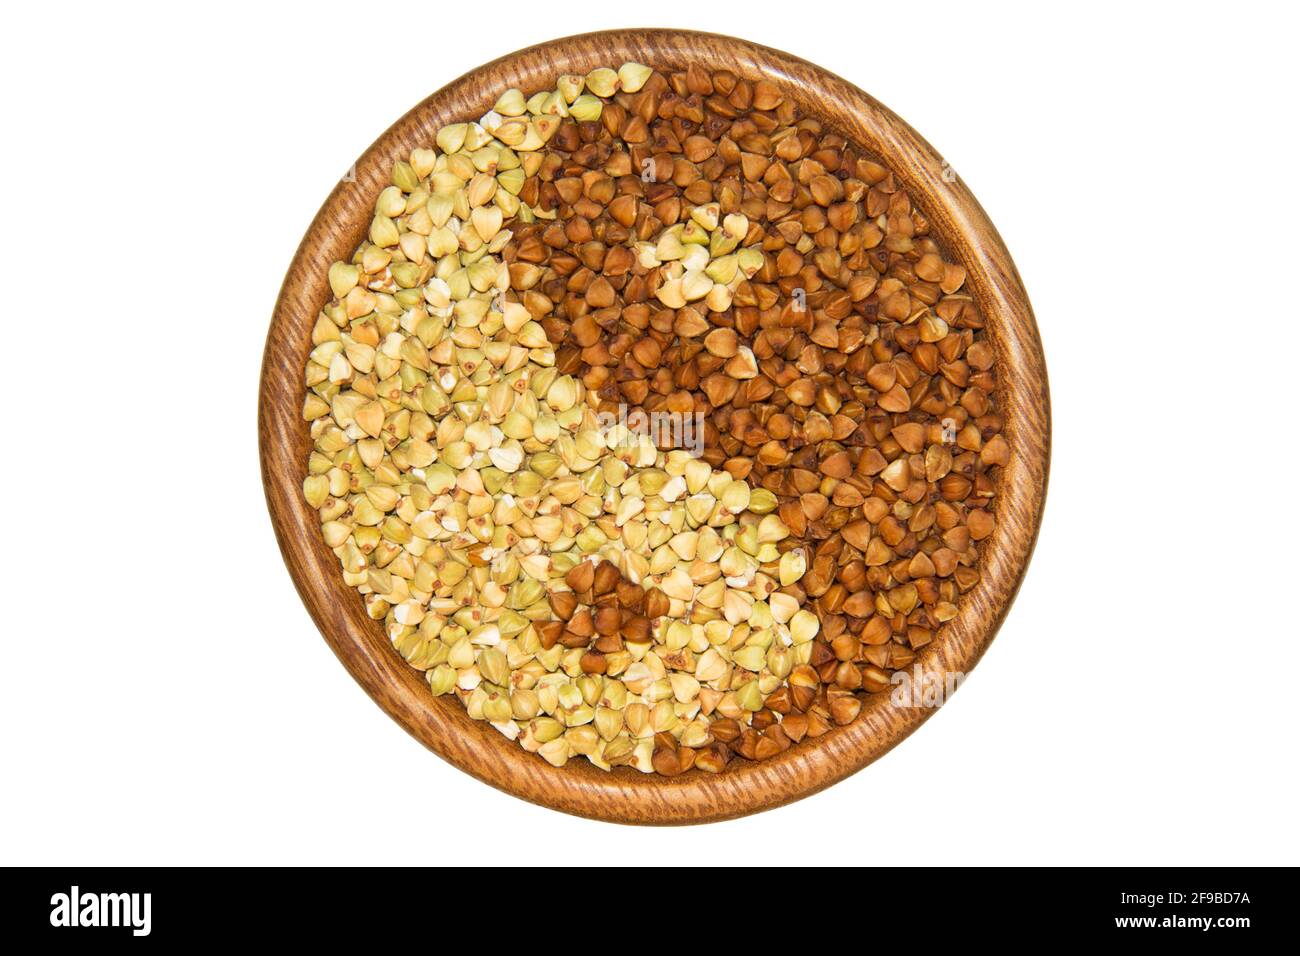 Green buckwheat and brown isolated on white background. Healthy and organic food. Image cut and placed on a white background. Stock Photo